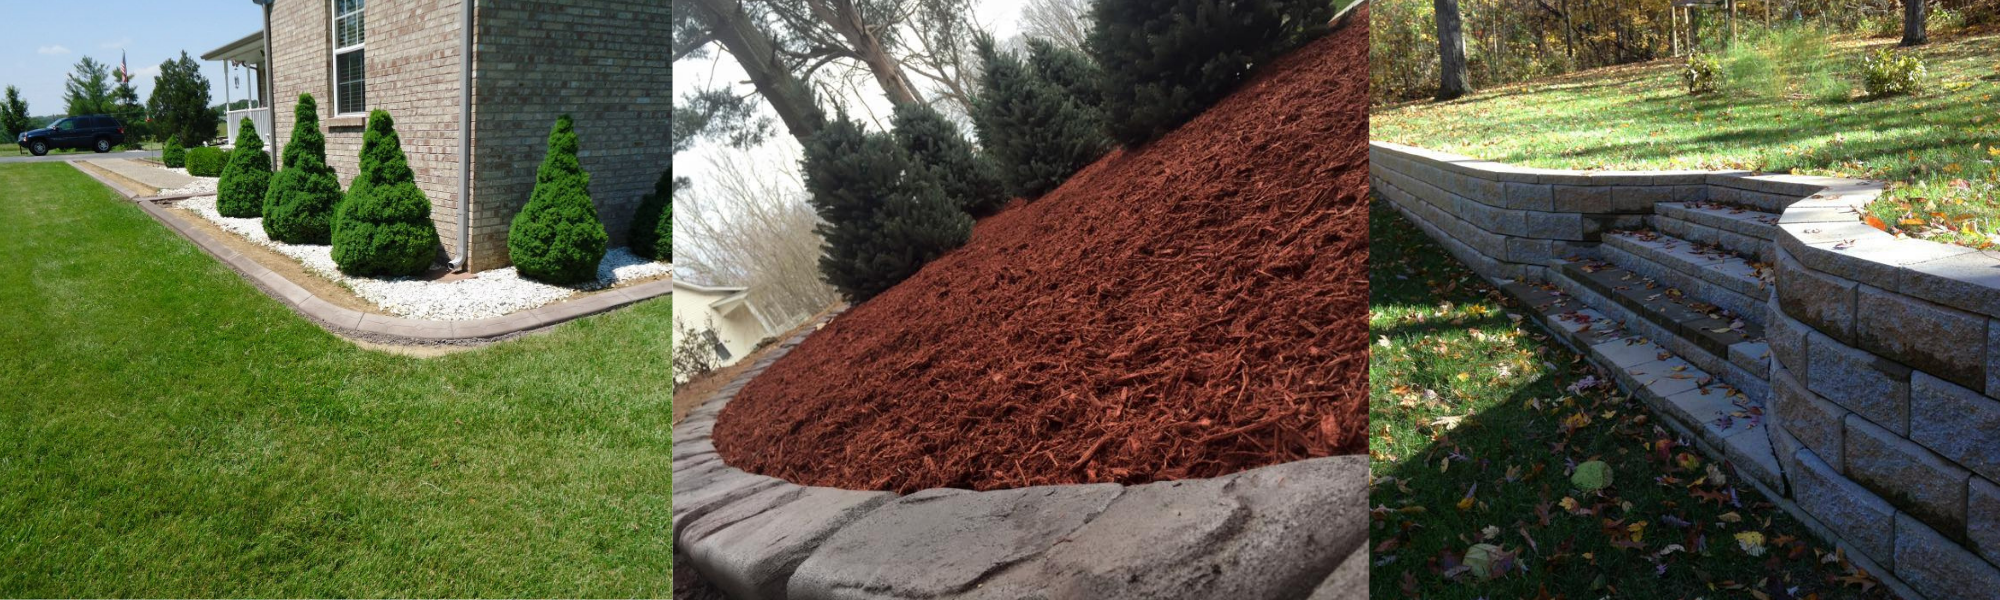 two retaining walls and up-close detail of red mulch